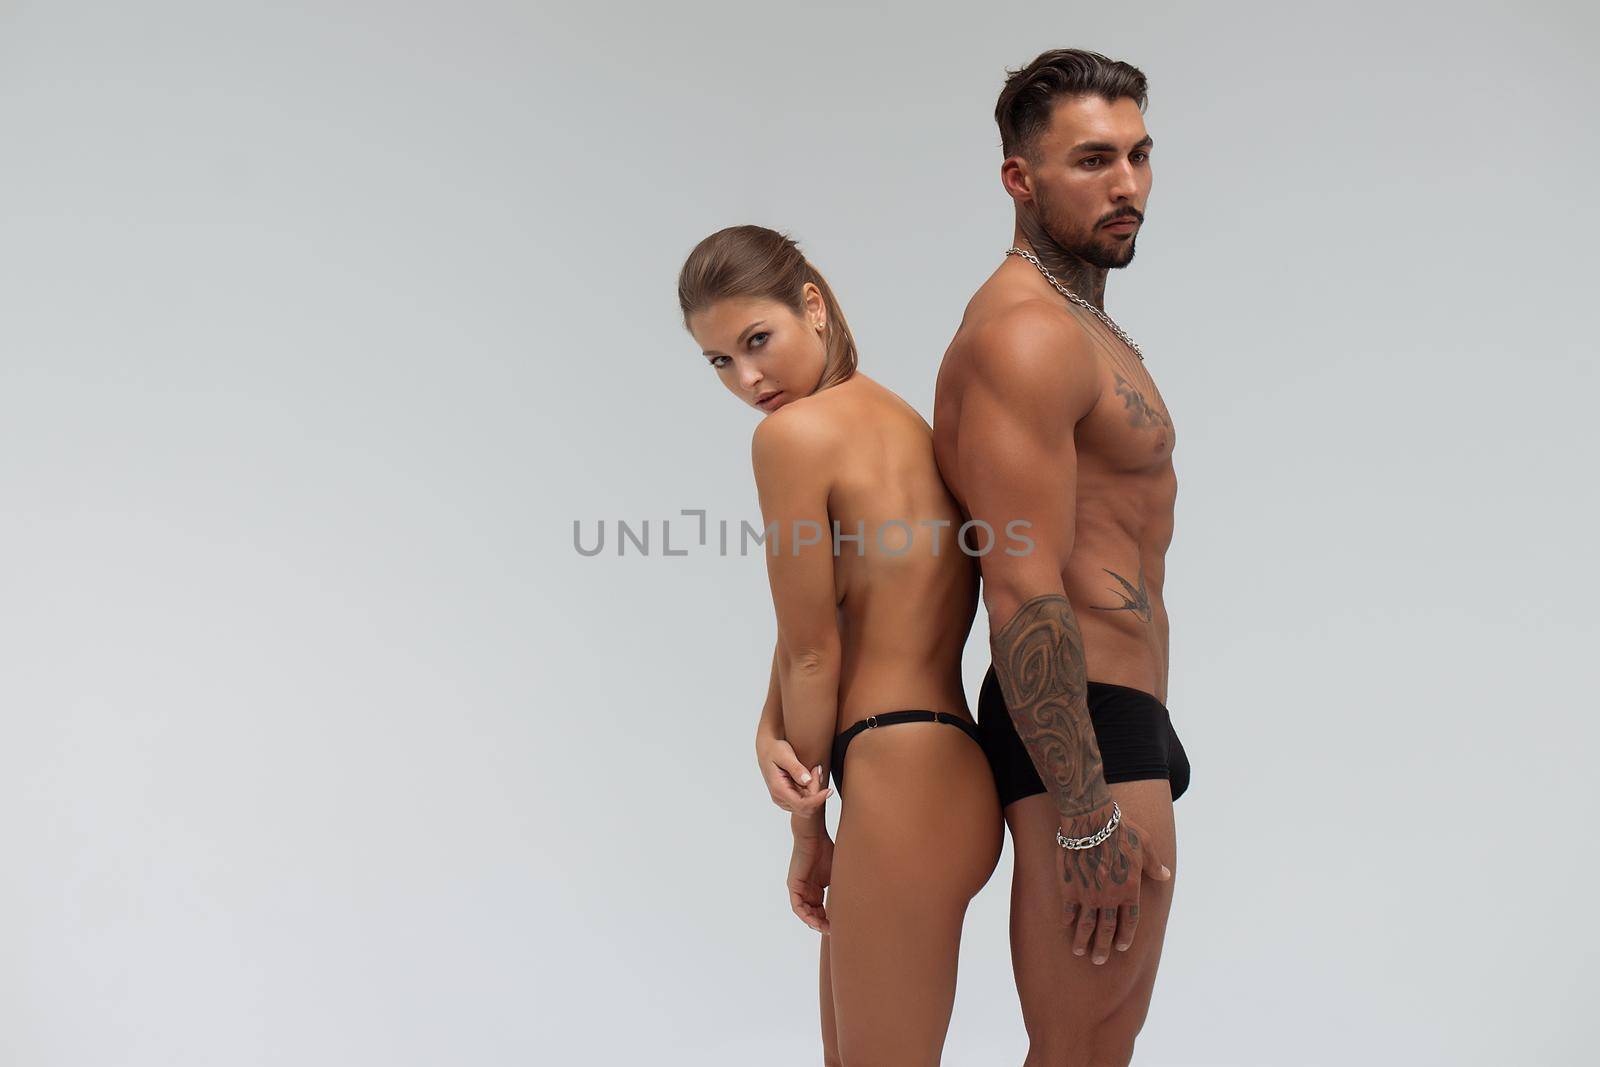 Muscular tattooed man embracing slim topless woman in panties on gray background